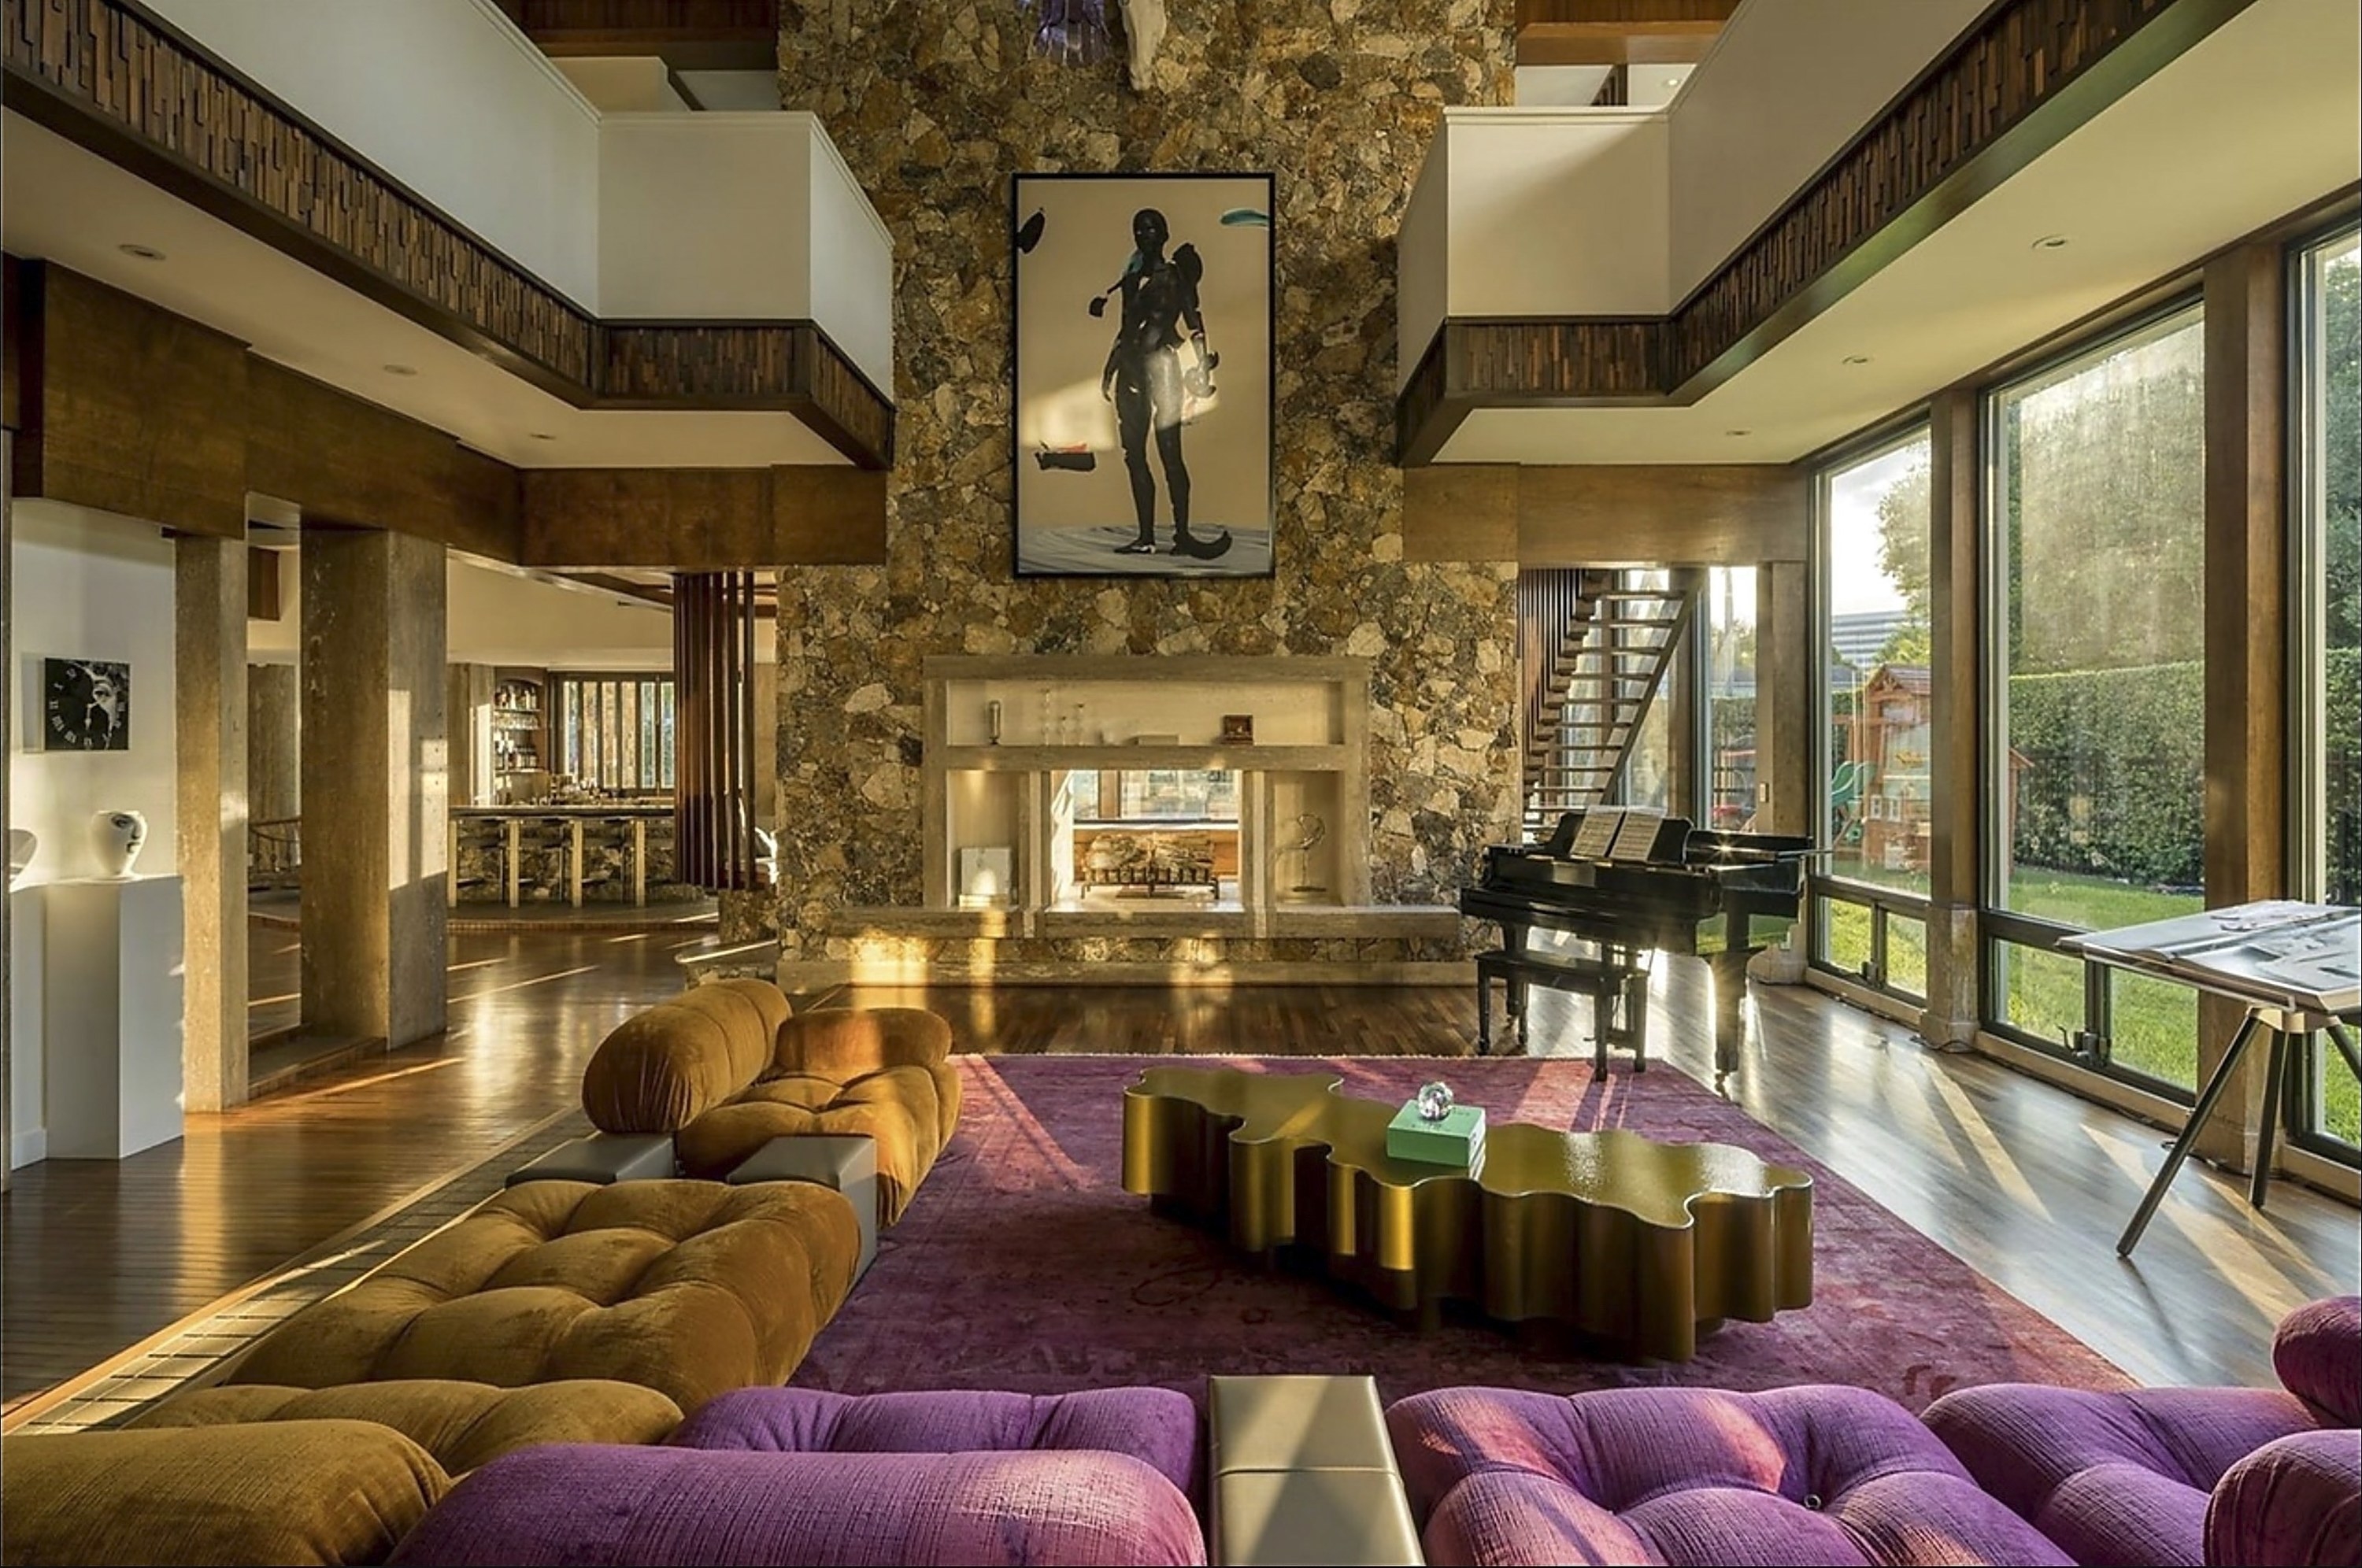 The high-ceiling living room area with sectional plush sofa and piano and floor-to-ceiling windows